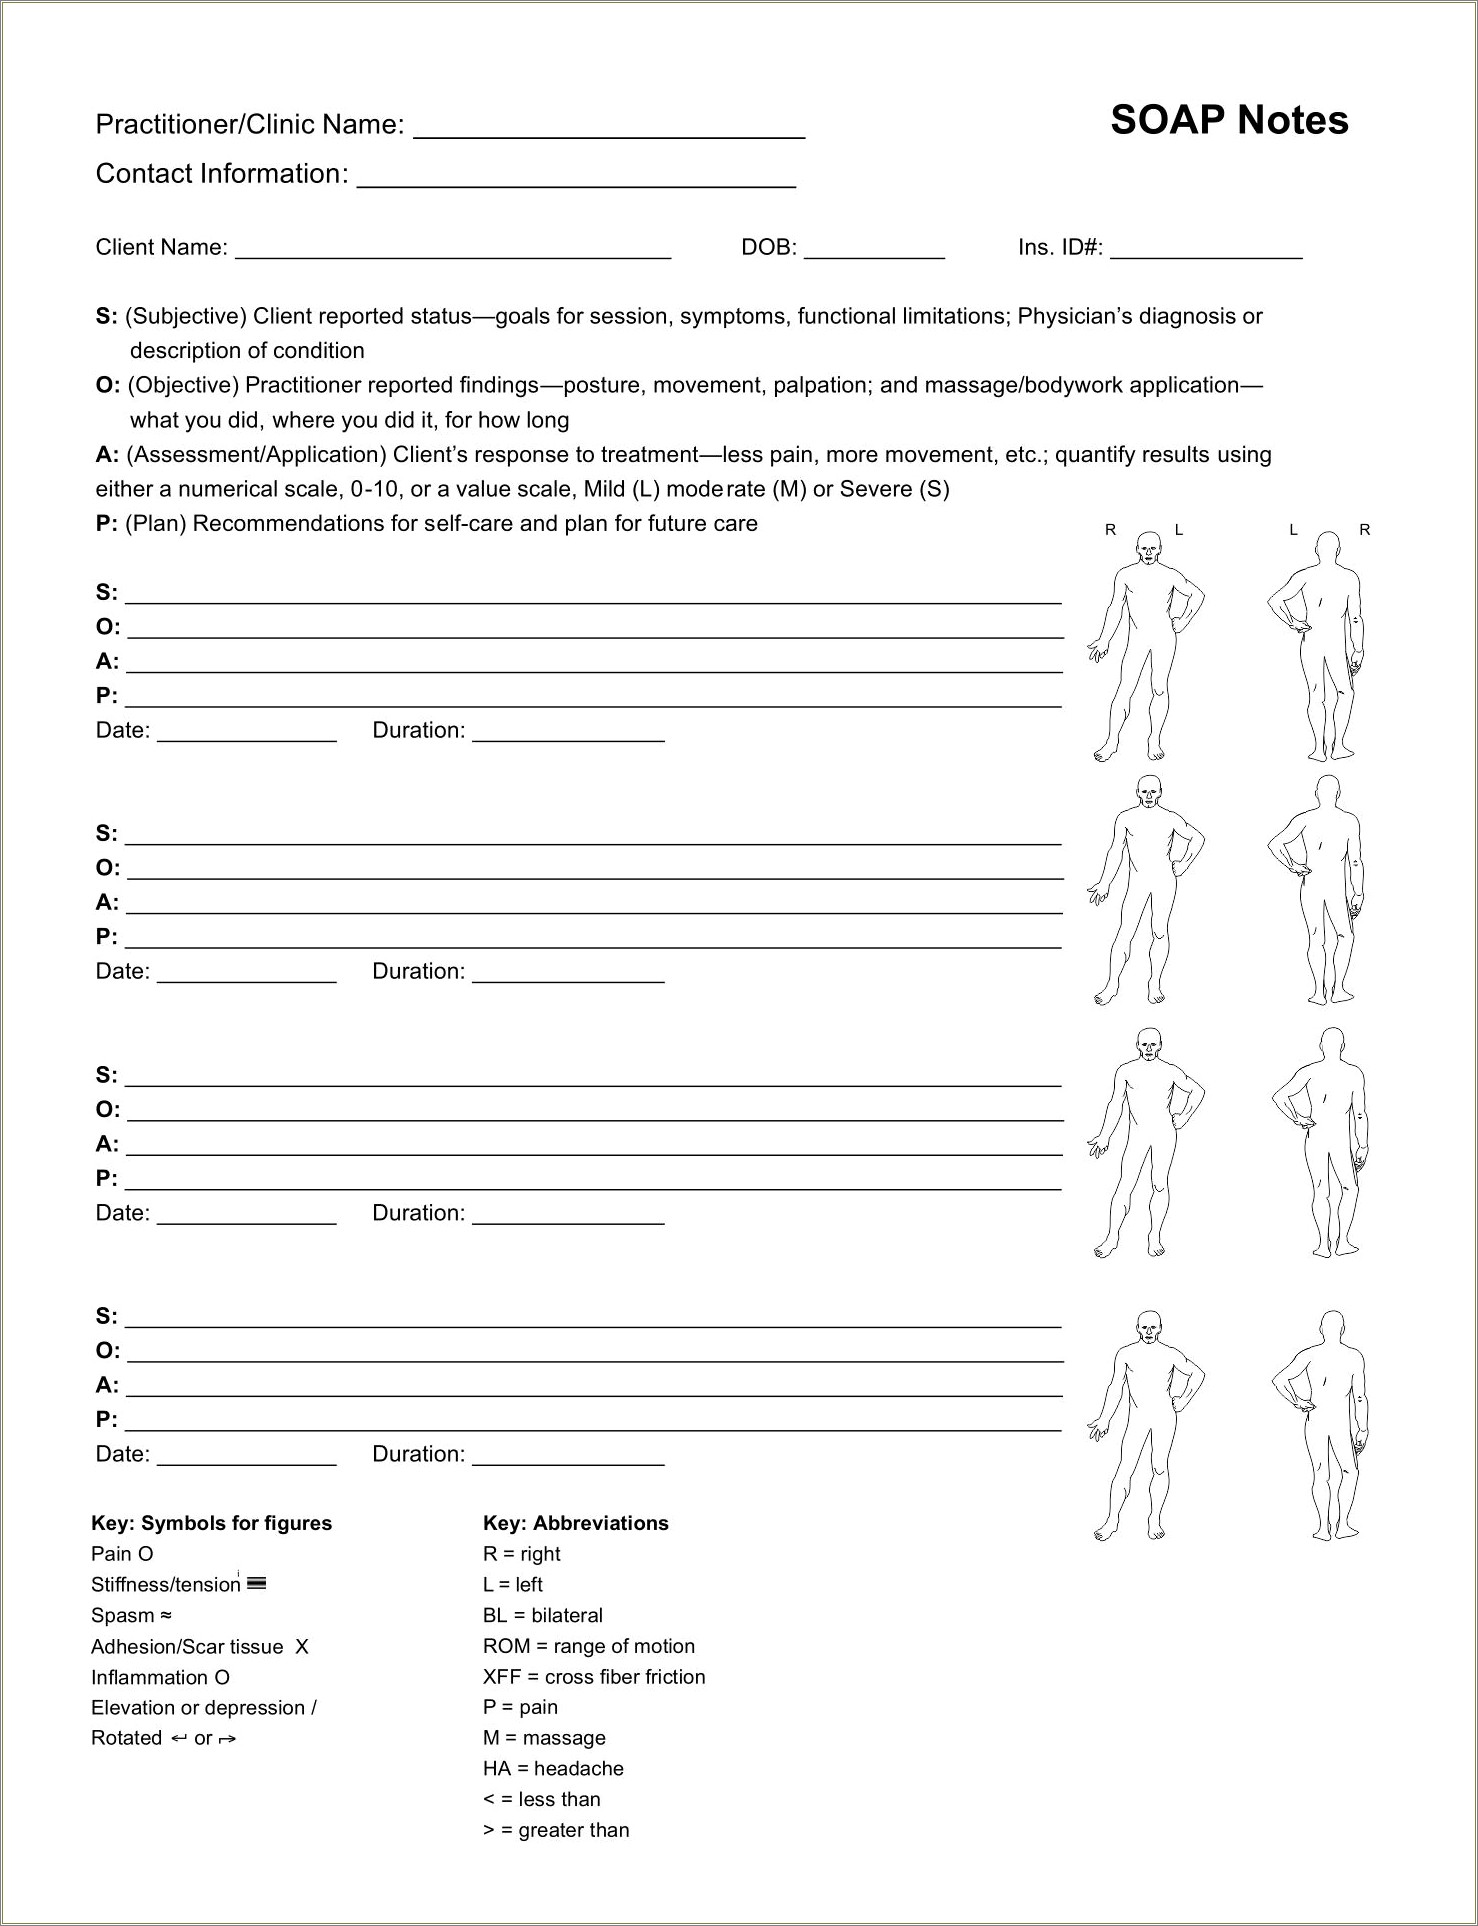 Free Soap Note Template For Nurse Practitioners